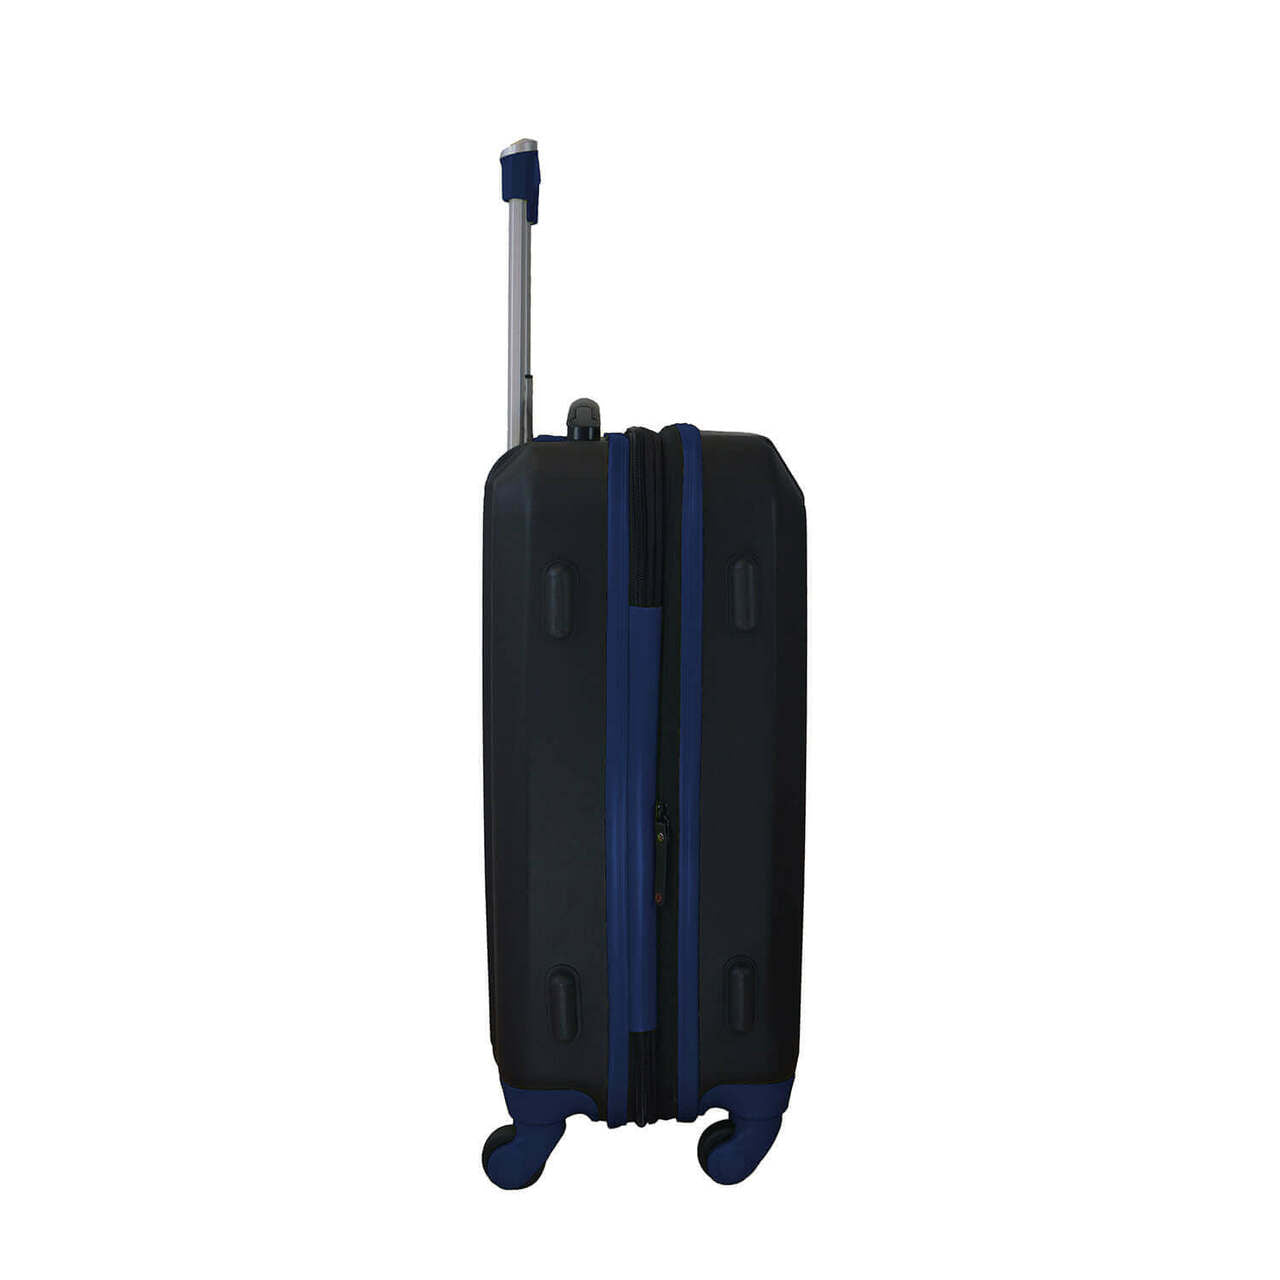 Uconn Carry On Spinner Luggage | Connecticut Hardcase Two-Tone Luggage Carry-on Spinner in Navy